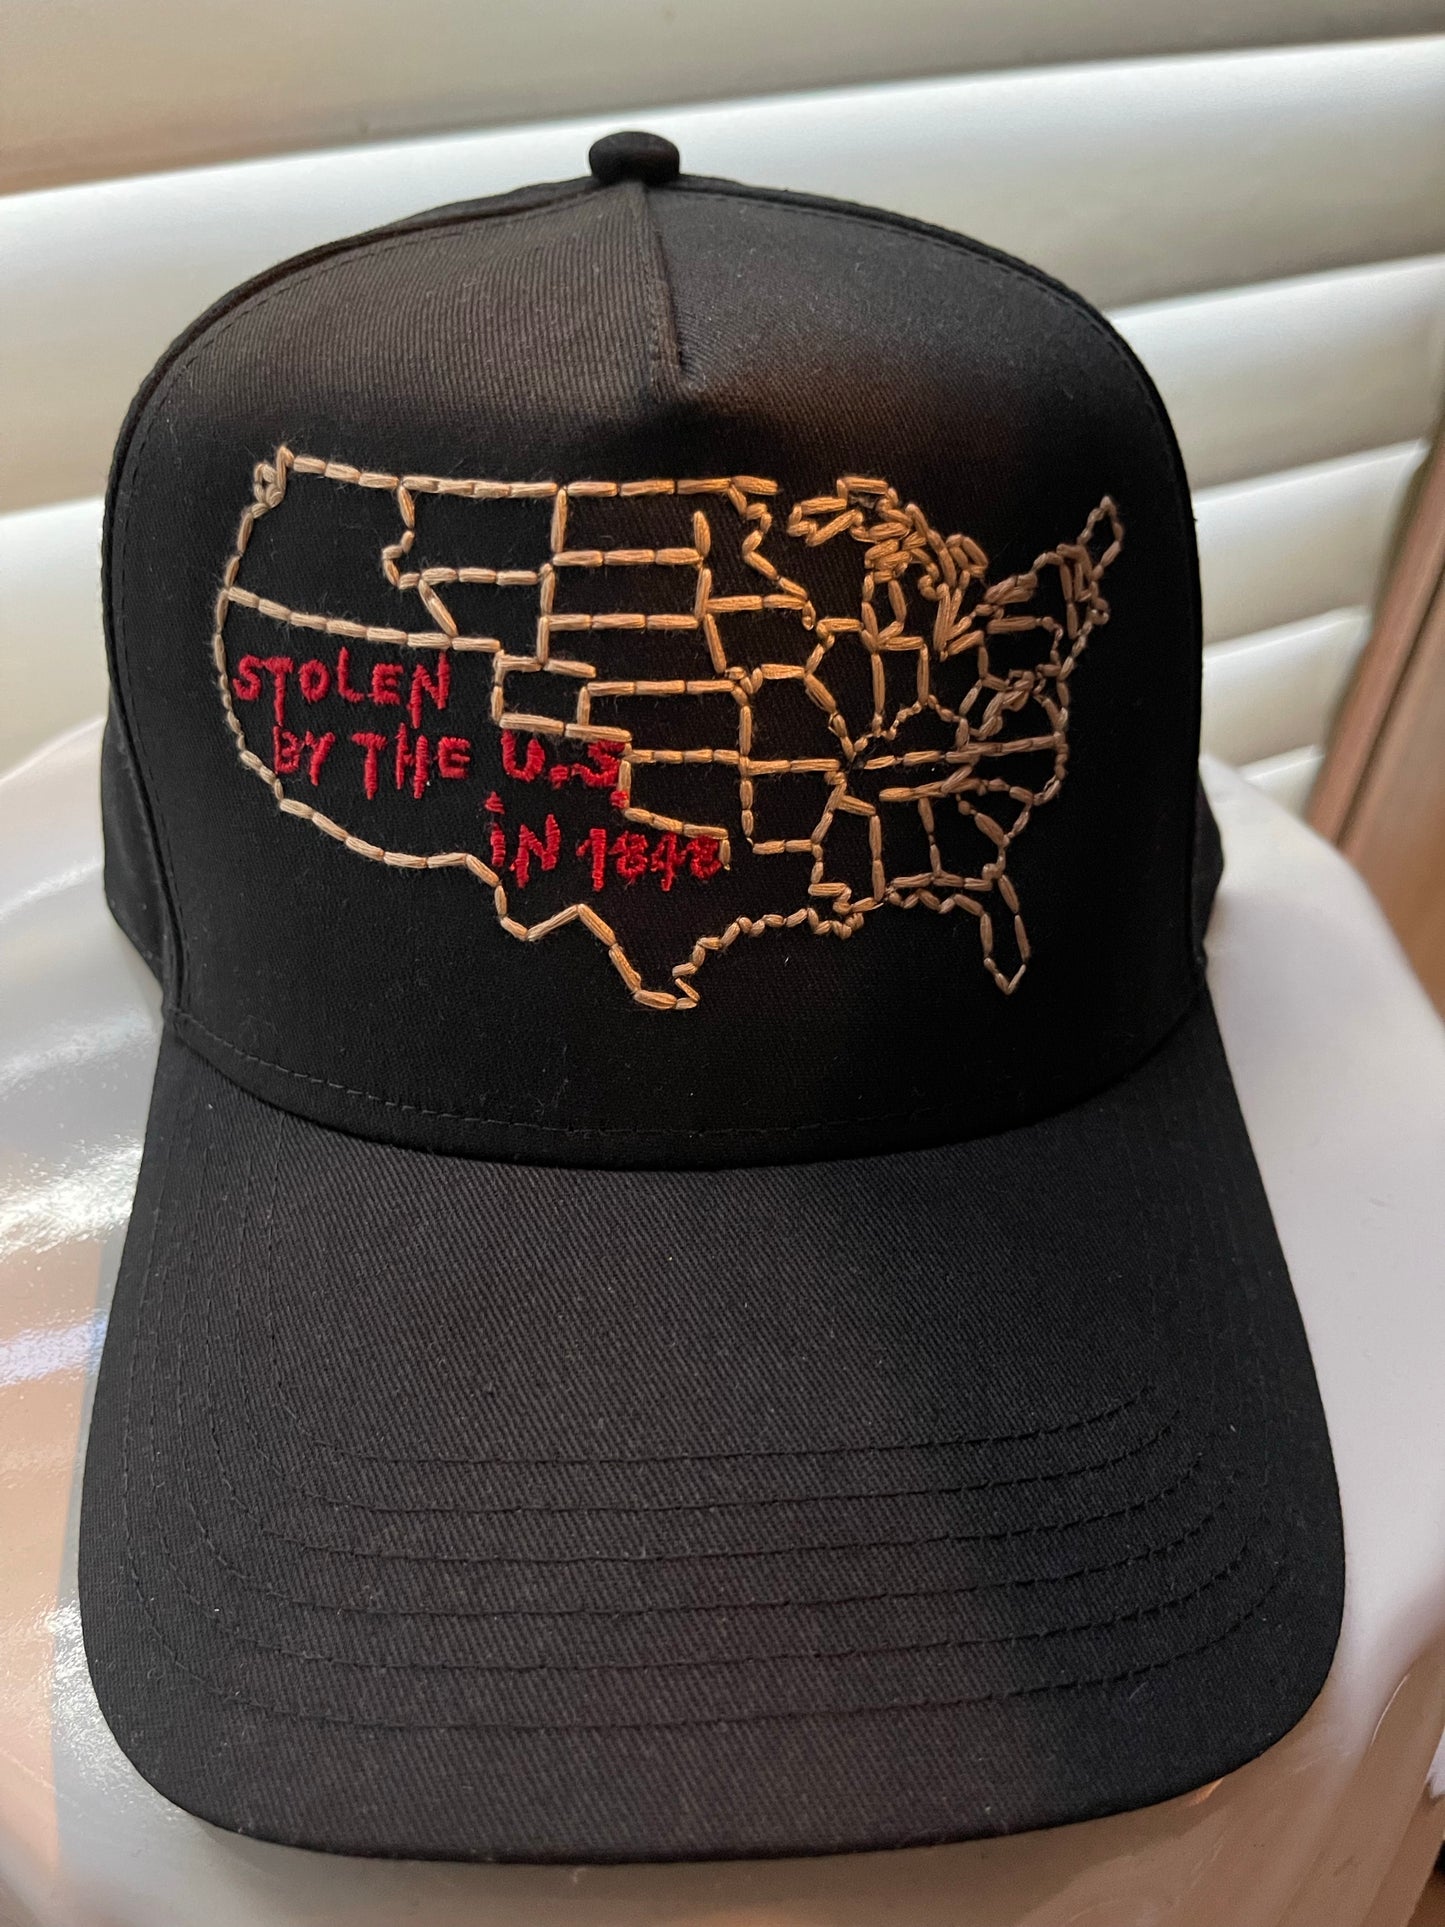 Stolen by the USA in 1848 | Hat